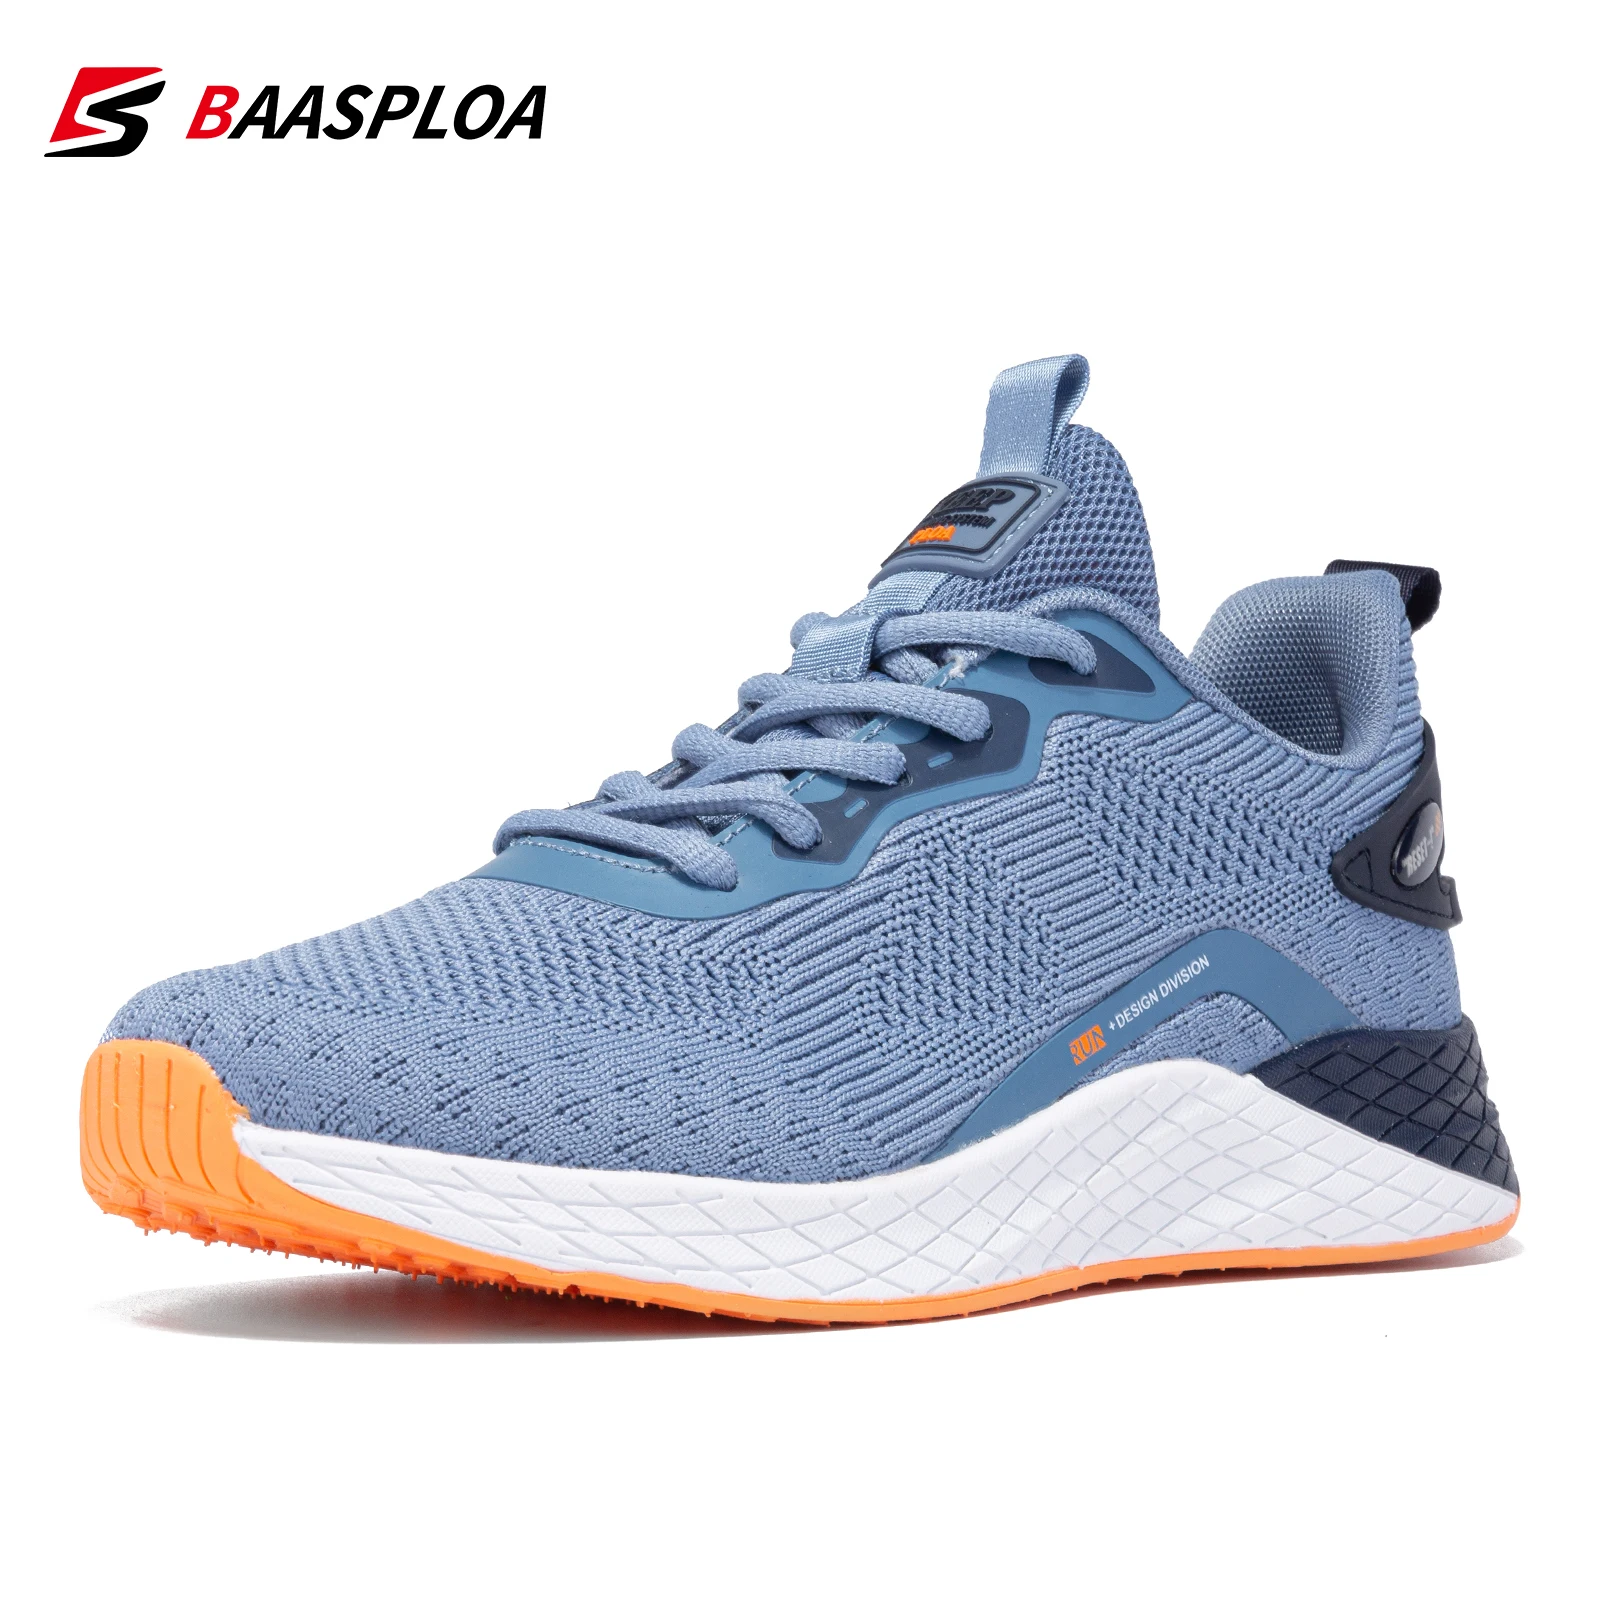 Baasploa 2022 Men Fashion Sneakers Breathable Tennis Male Casual Shoes Non-Slip Shock-Absorbing Knit Lightweight Walking Shoes